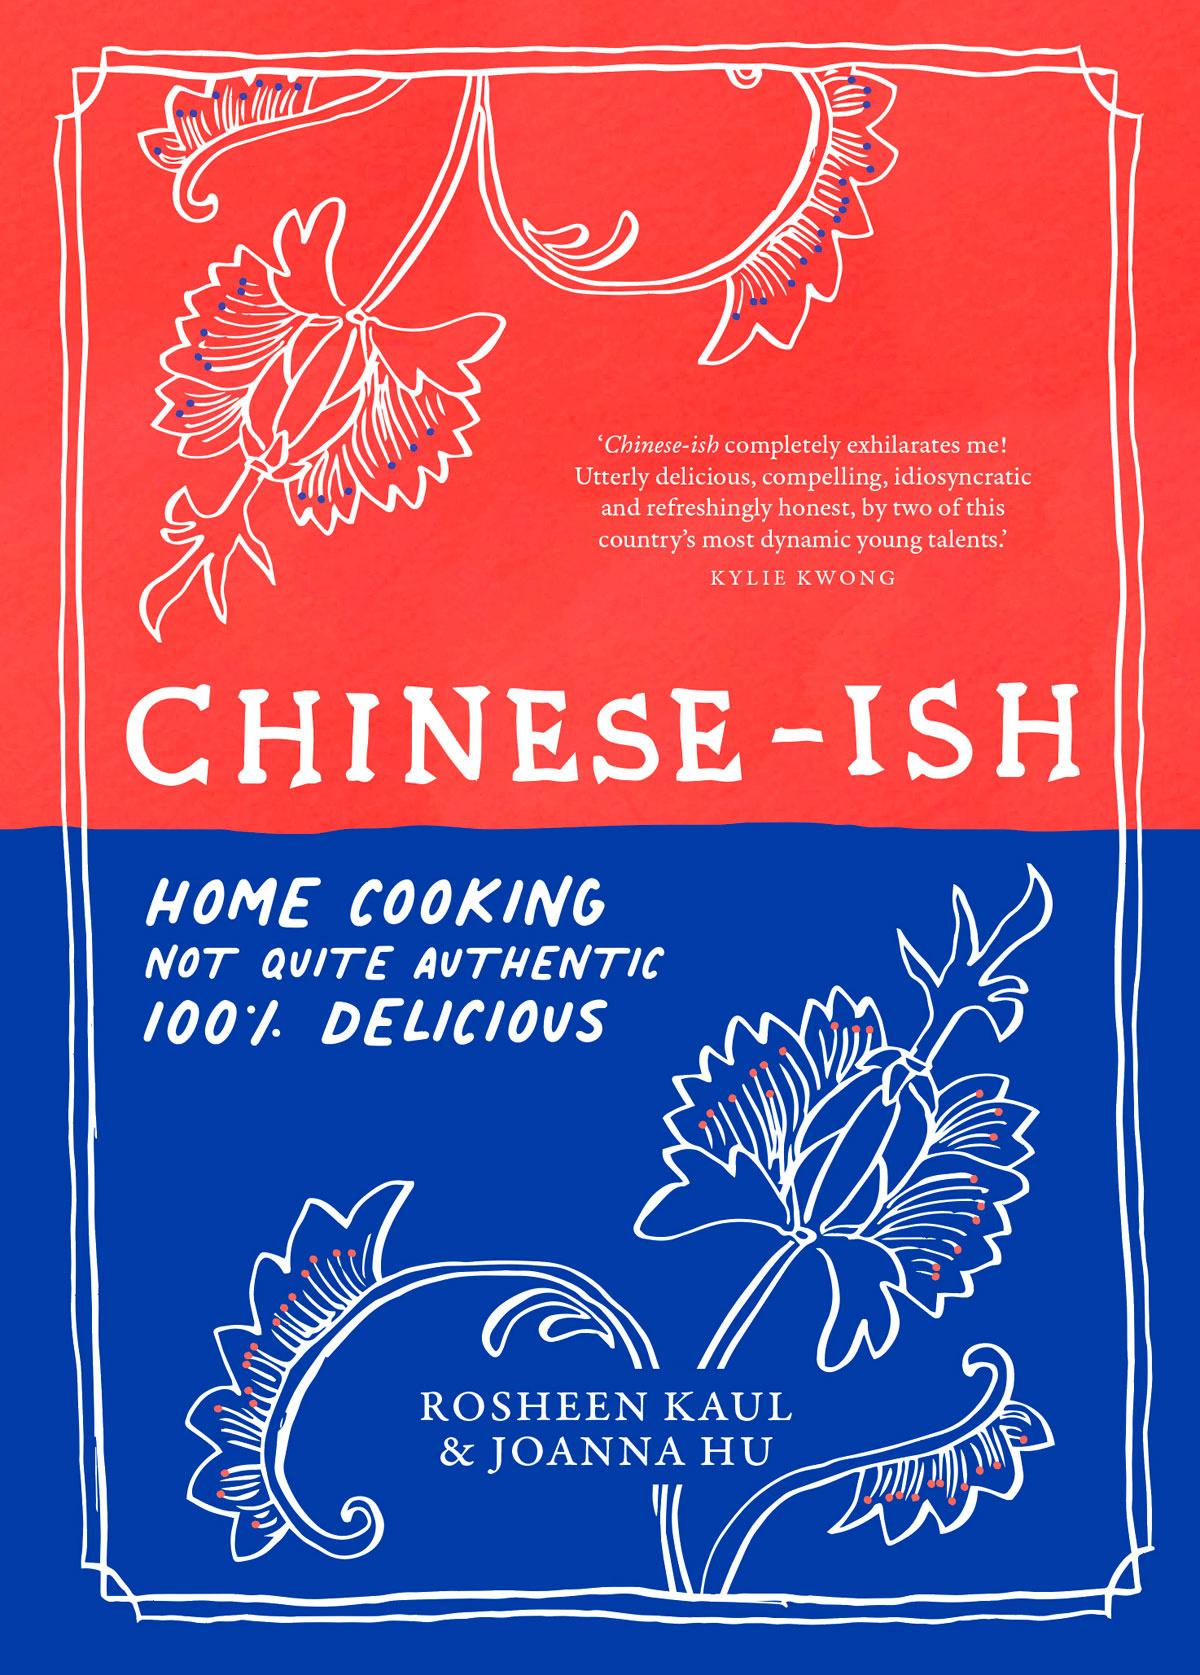 Book cover of Chinese-ish by Rosheen Kaul and Joanna Hu